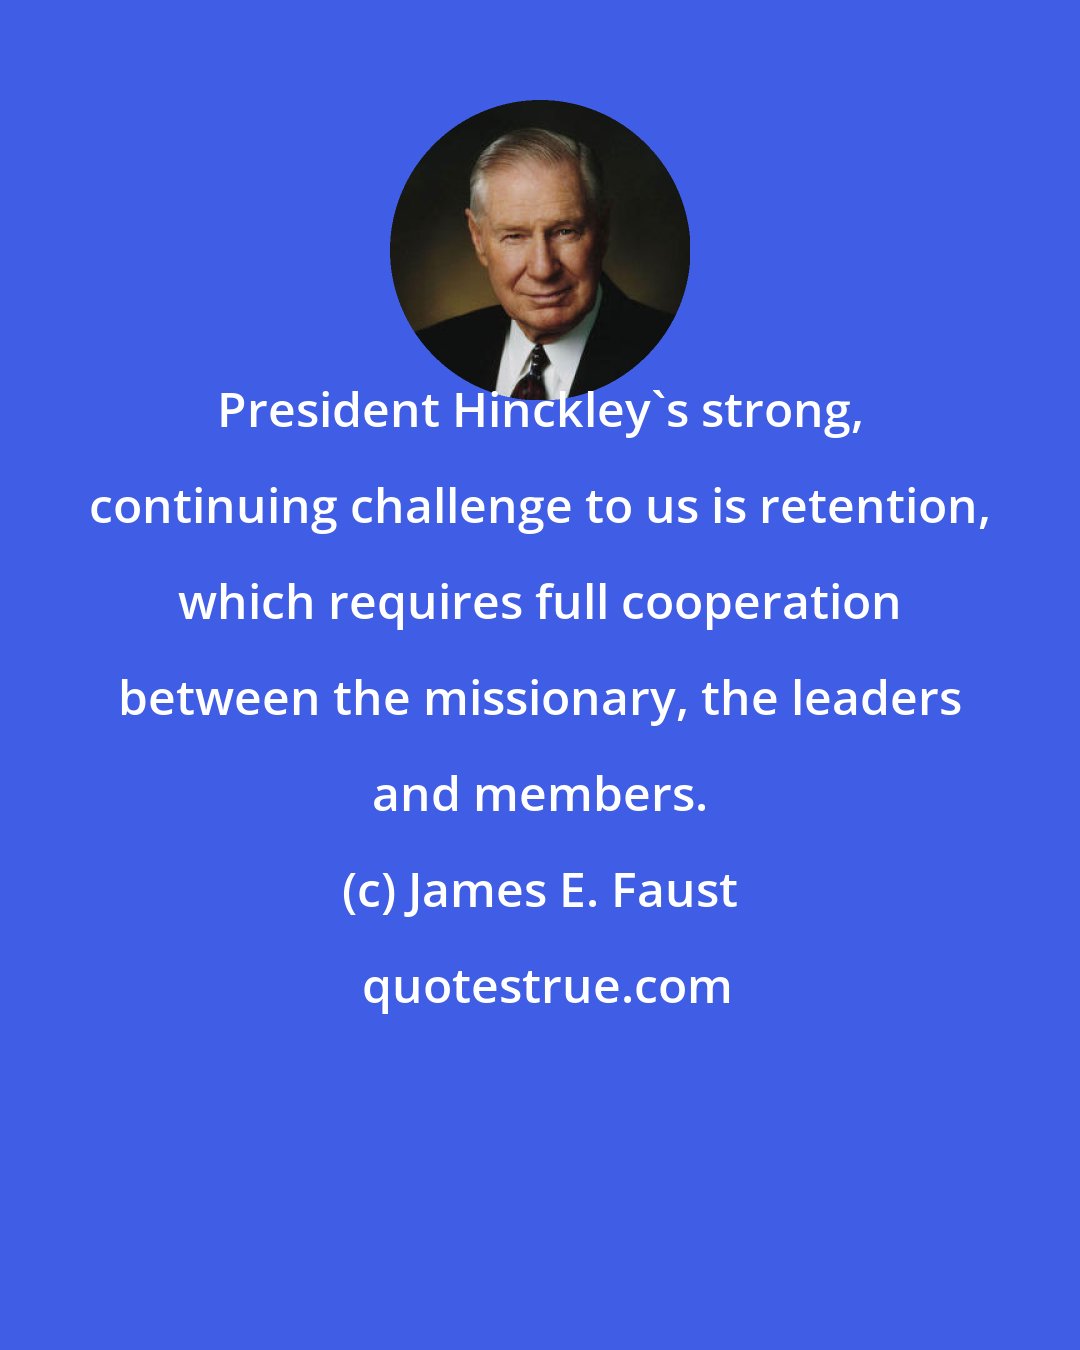 James E. Faust: President Hinckley's strong, continuing challenge to us is retention, which requires full cooperation between the missionary, the leaders and members.